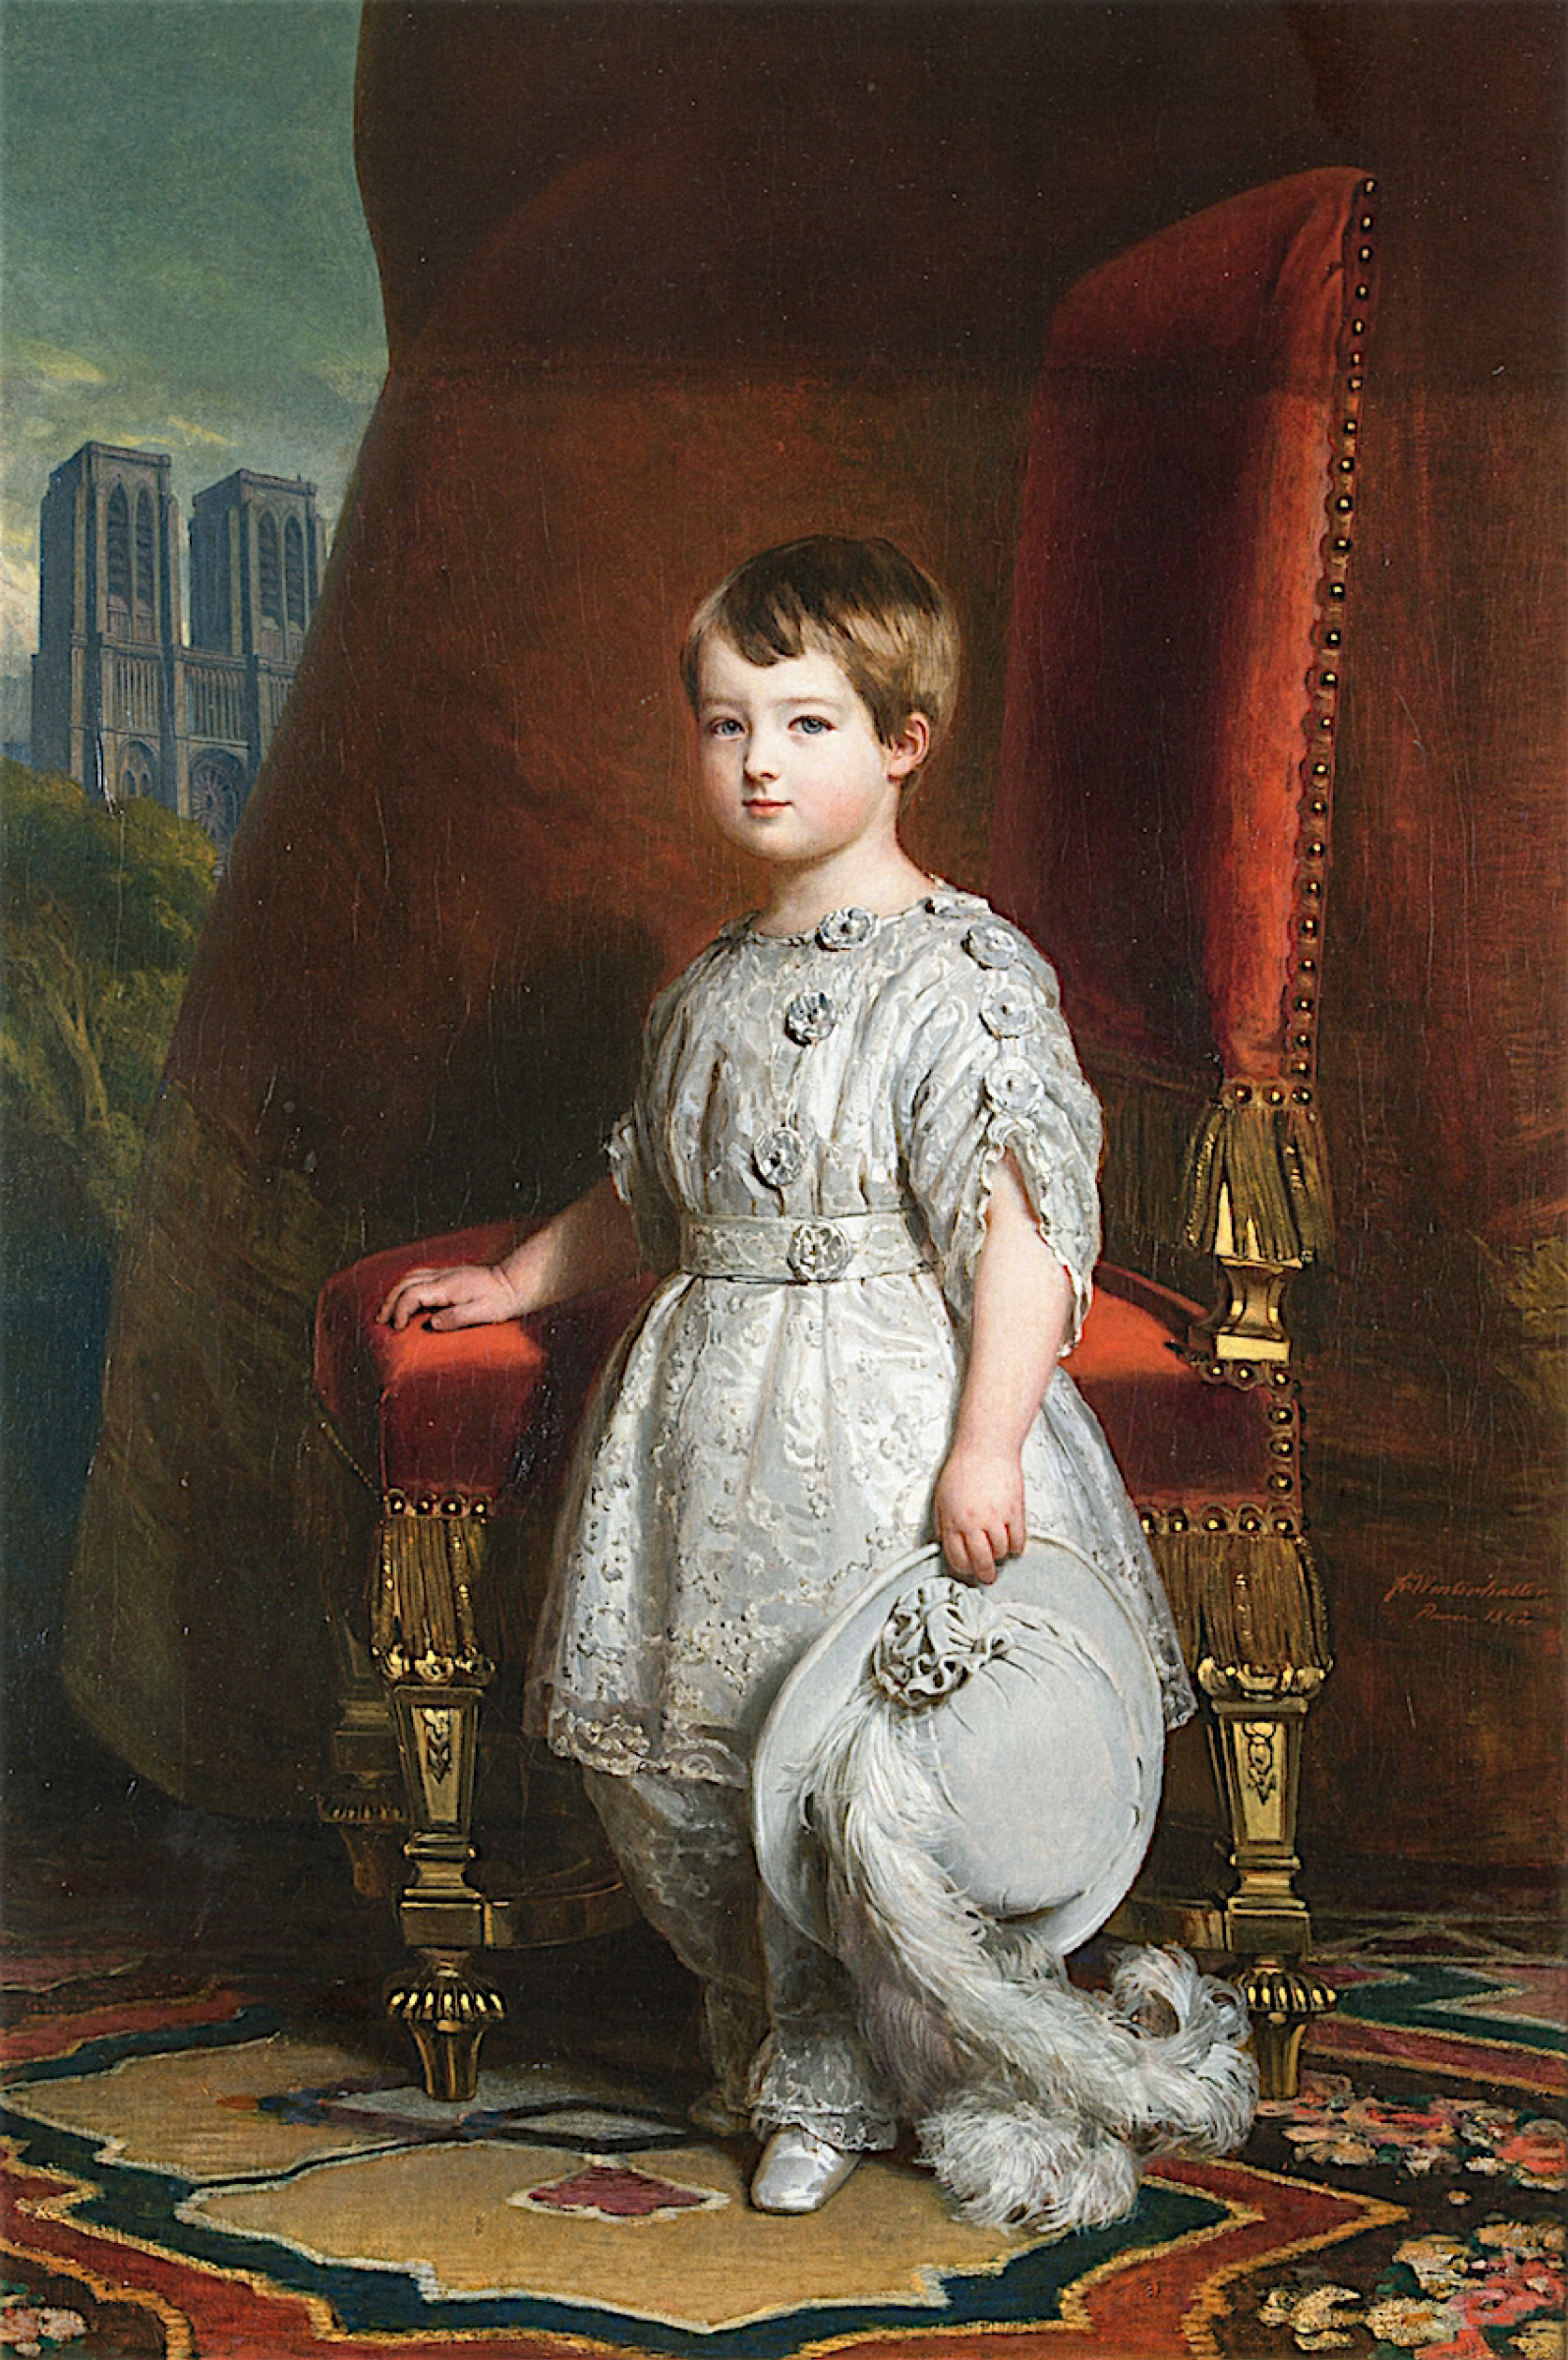 Louis-Philippe albert of orléans, count of Paris, 1842, 97×122 cm by Franz  Xaver Winterhalter: History, Analysis & Facts